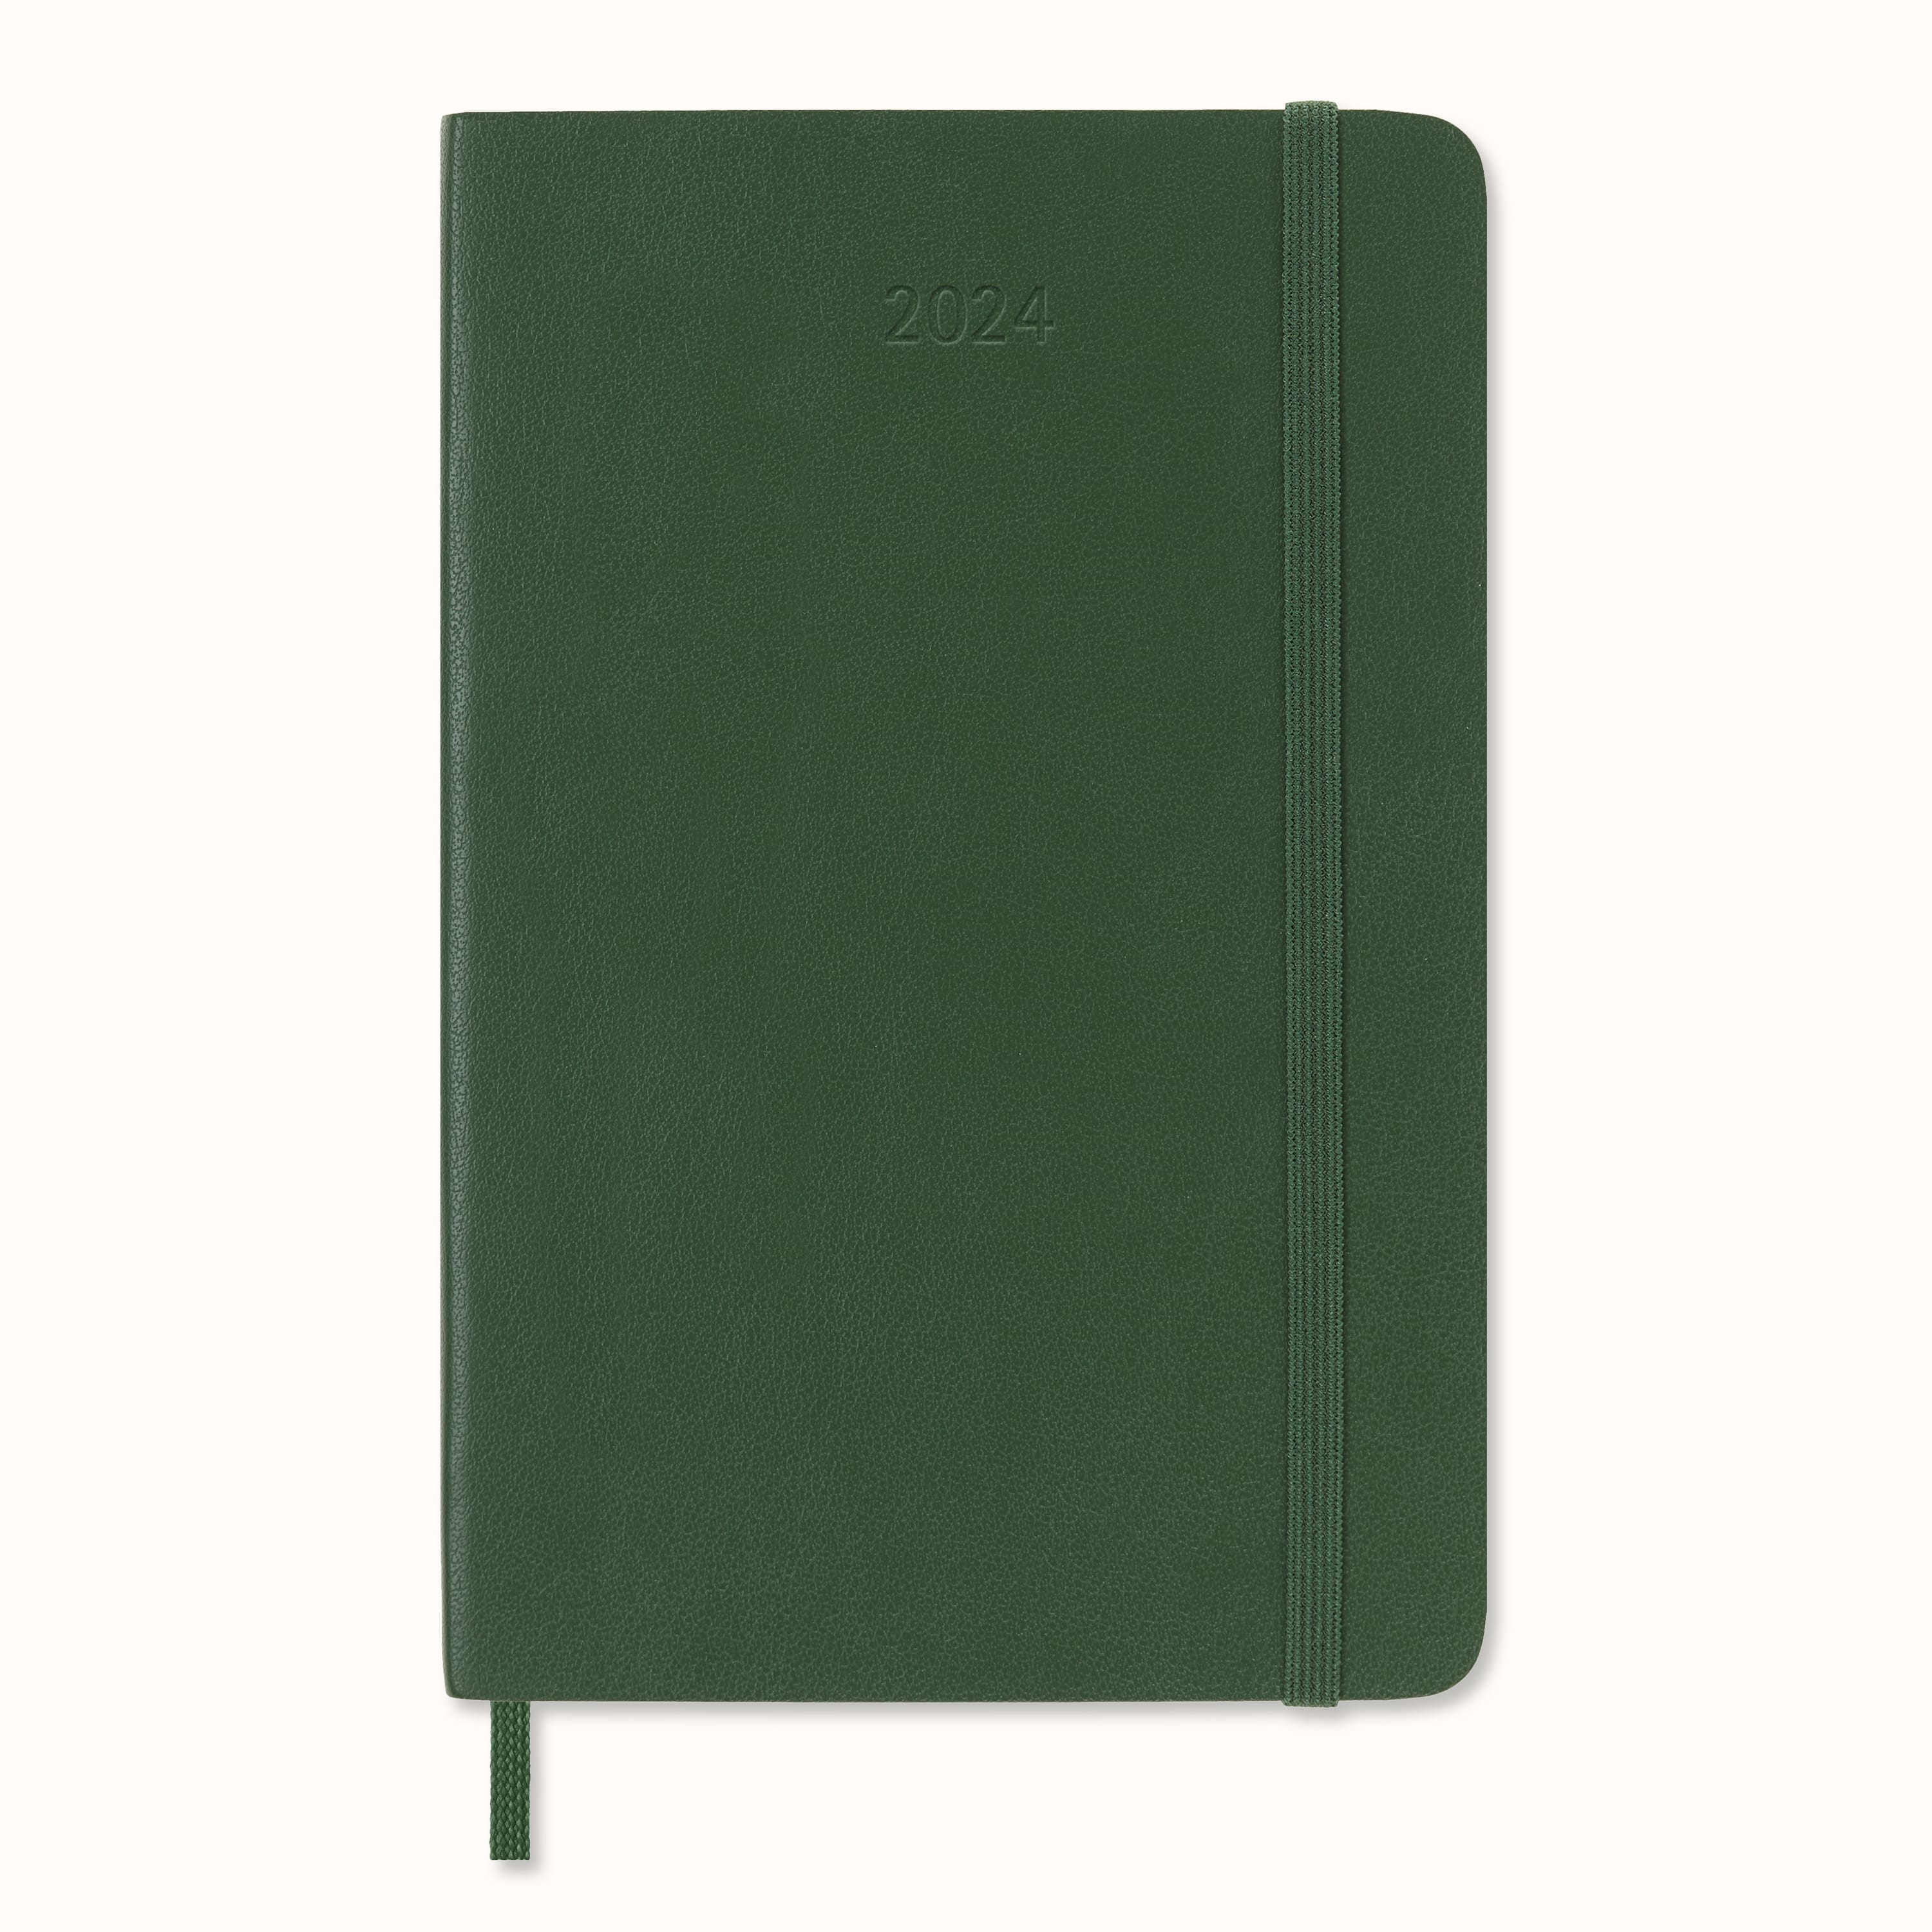 Classic Planner 2024 Pocket Weekly, soft cover, 12 months Myrtle Green